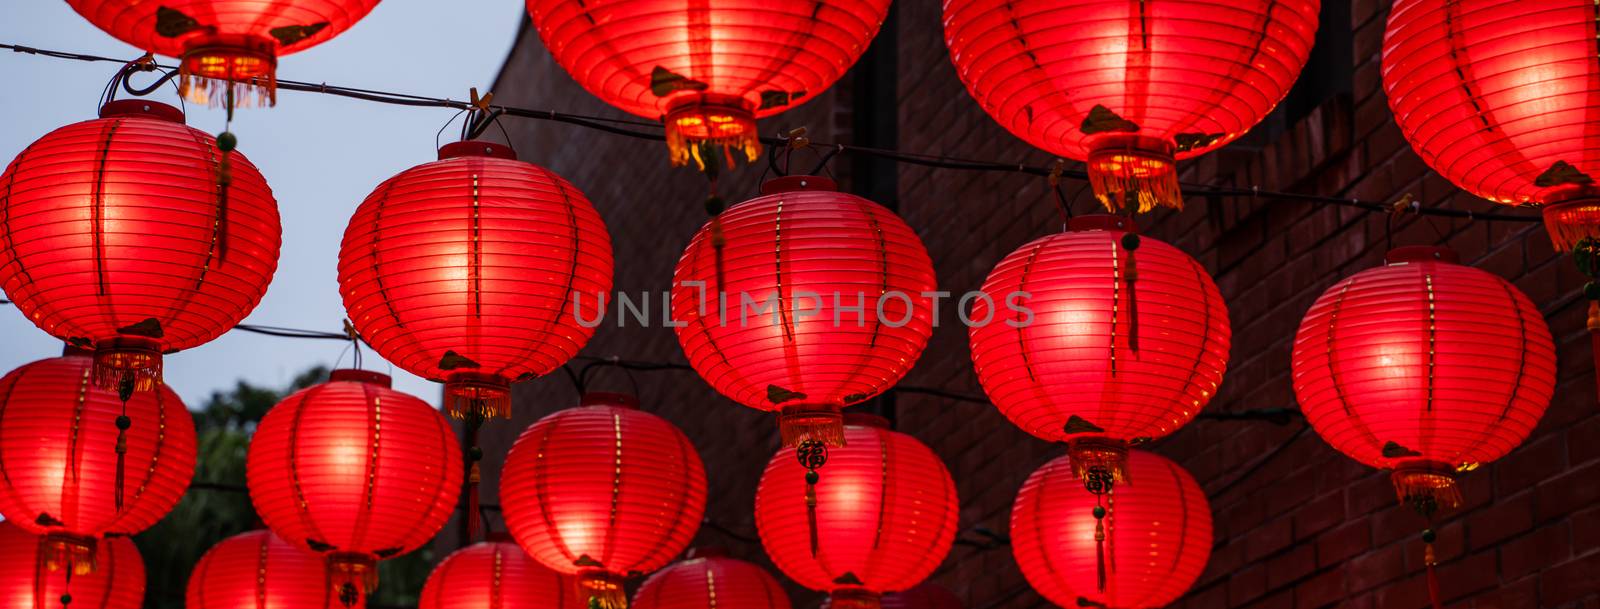 Beautiful round red lantern hanging on old traditional street, c by ROMIXIMAGE